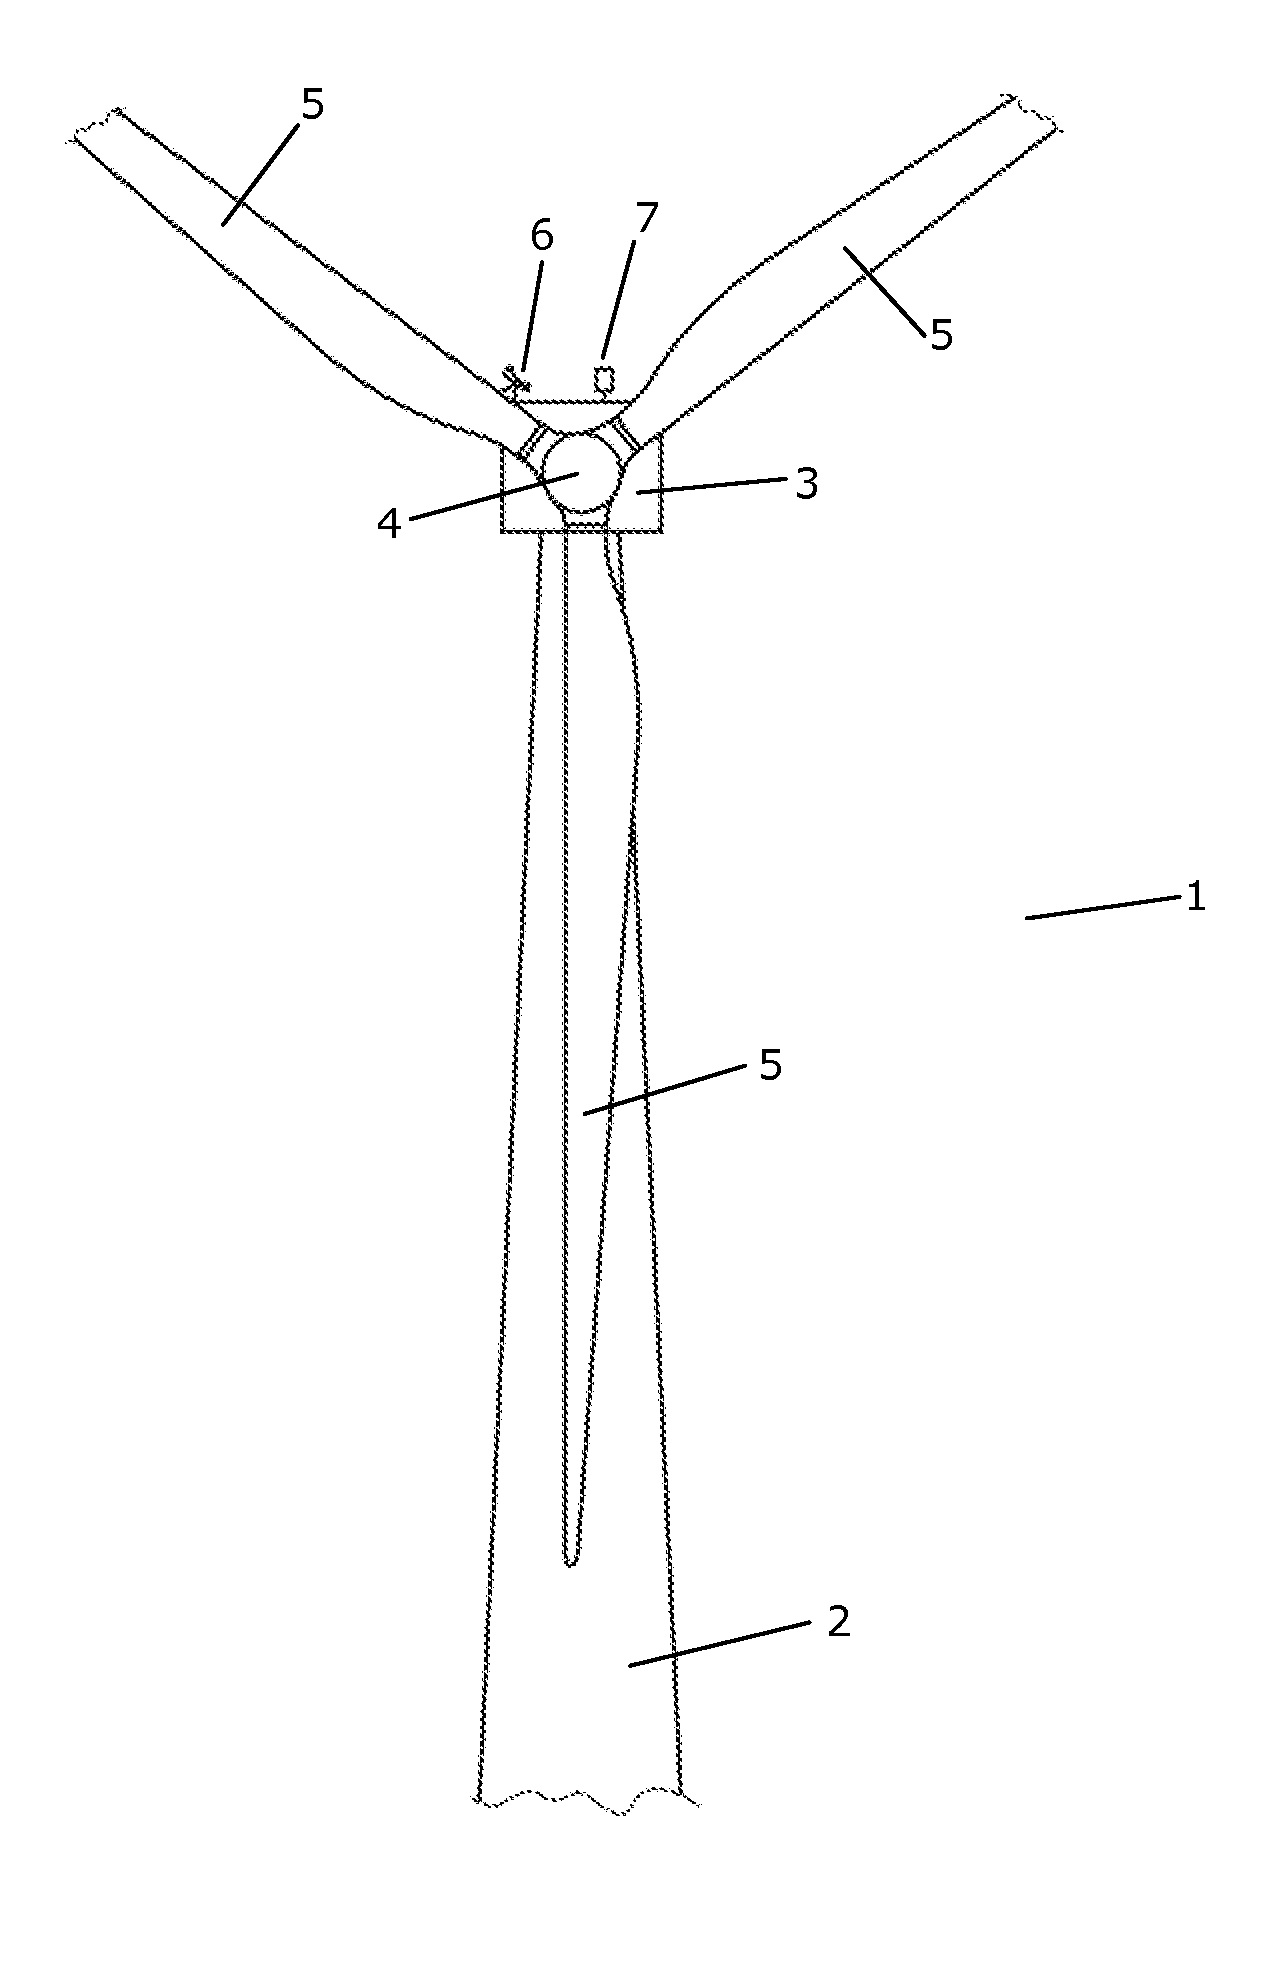 Control System and a Method for Controlling a Wind Turbine